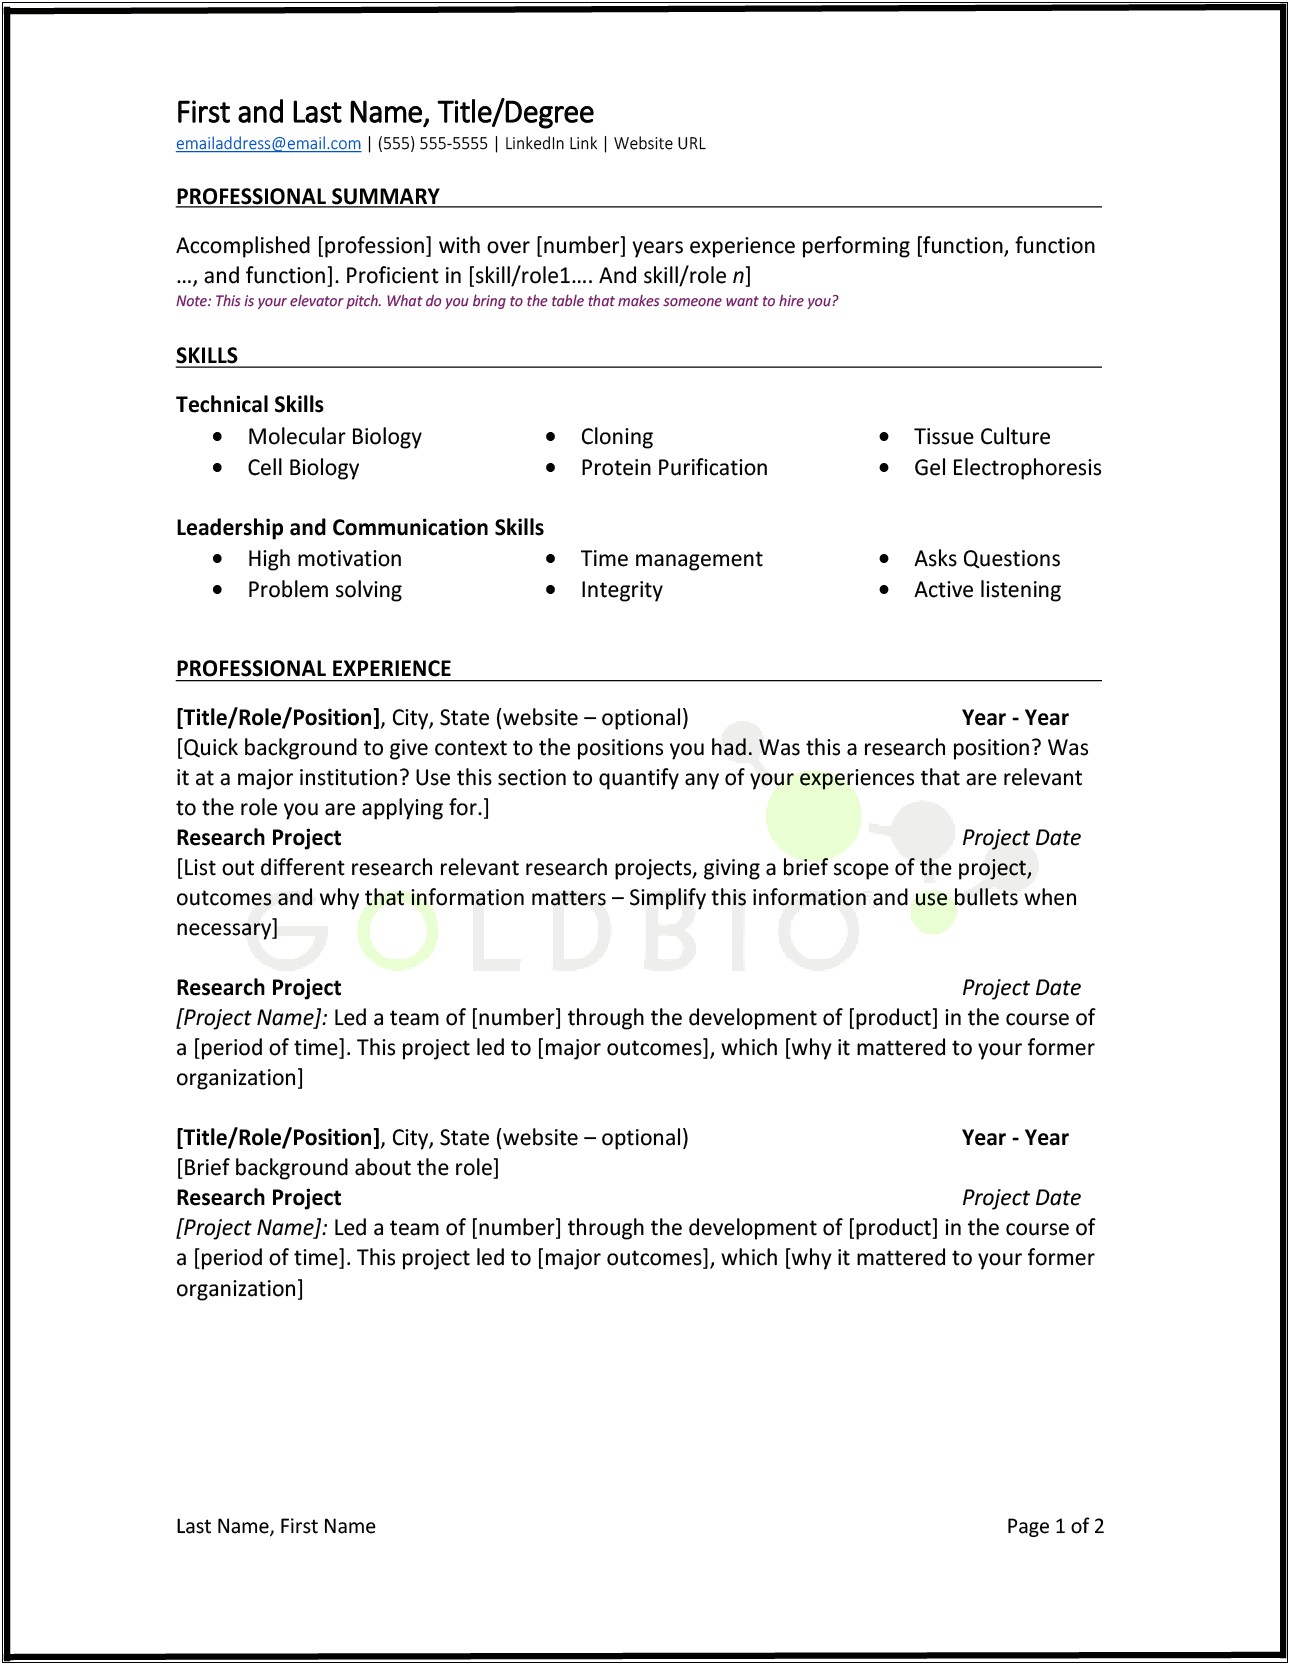 Listing Skills Without Work Experience Resume